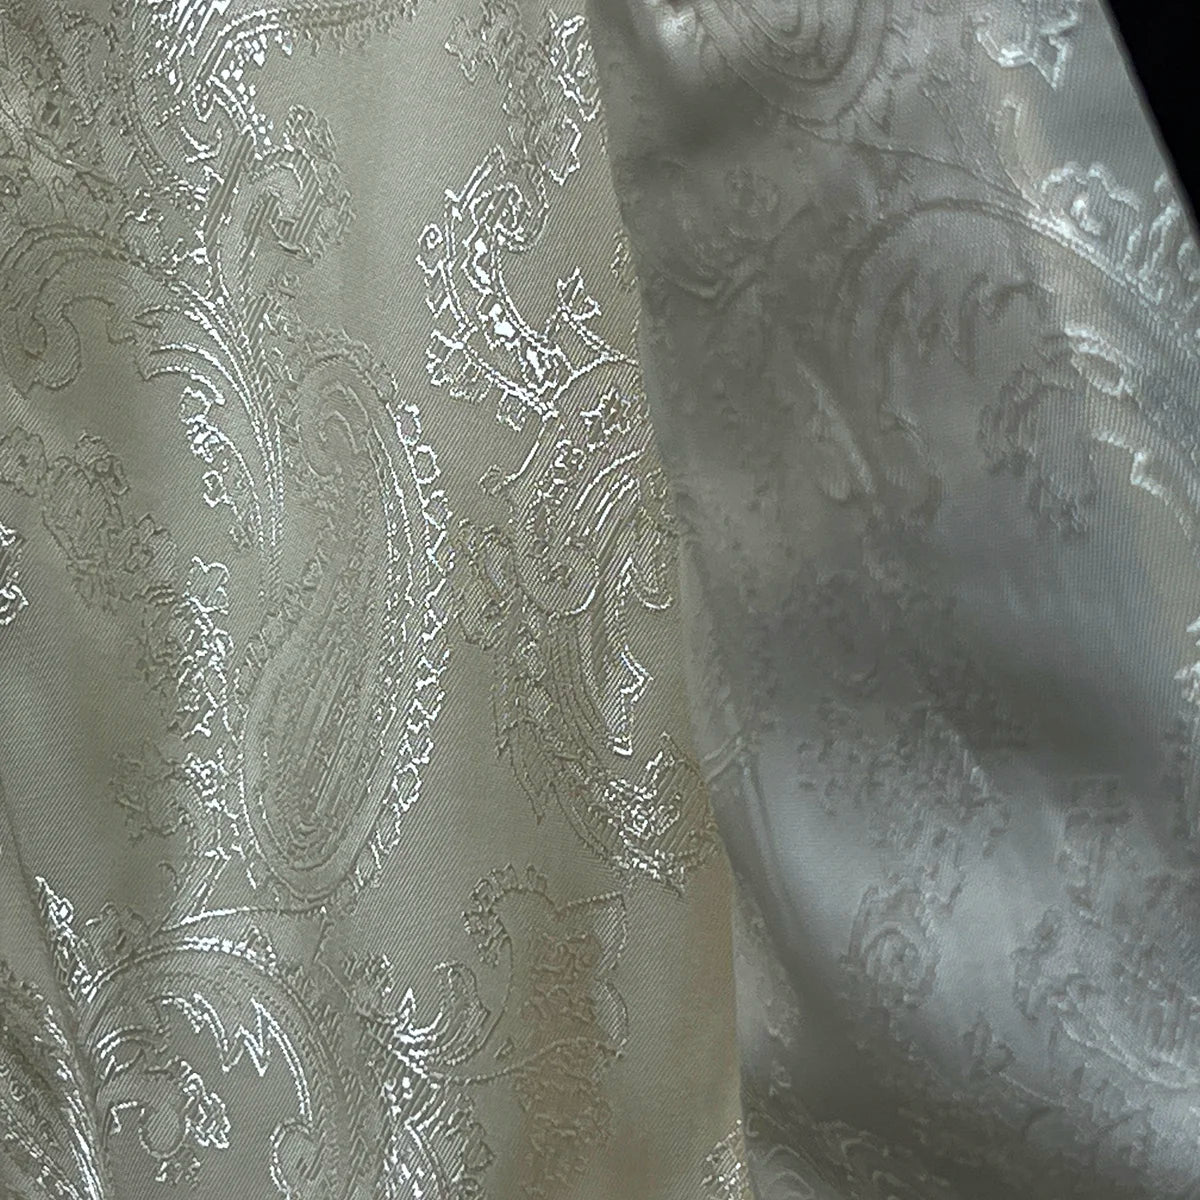 Detailed view of the off white paisley Bemberg lining inside the ivory tuxedo jacket, highlighting the quality fabric.